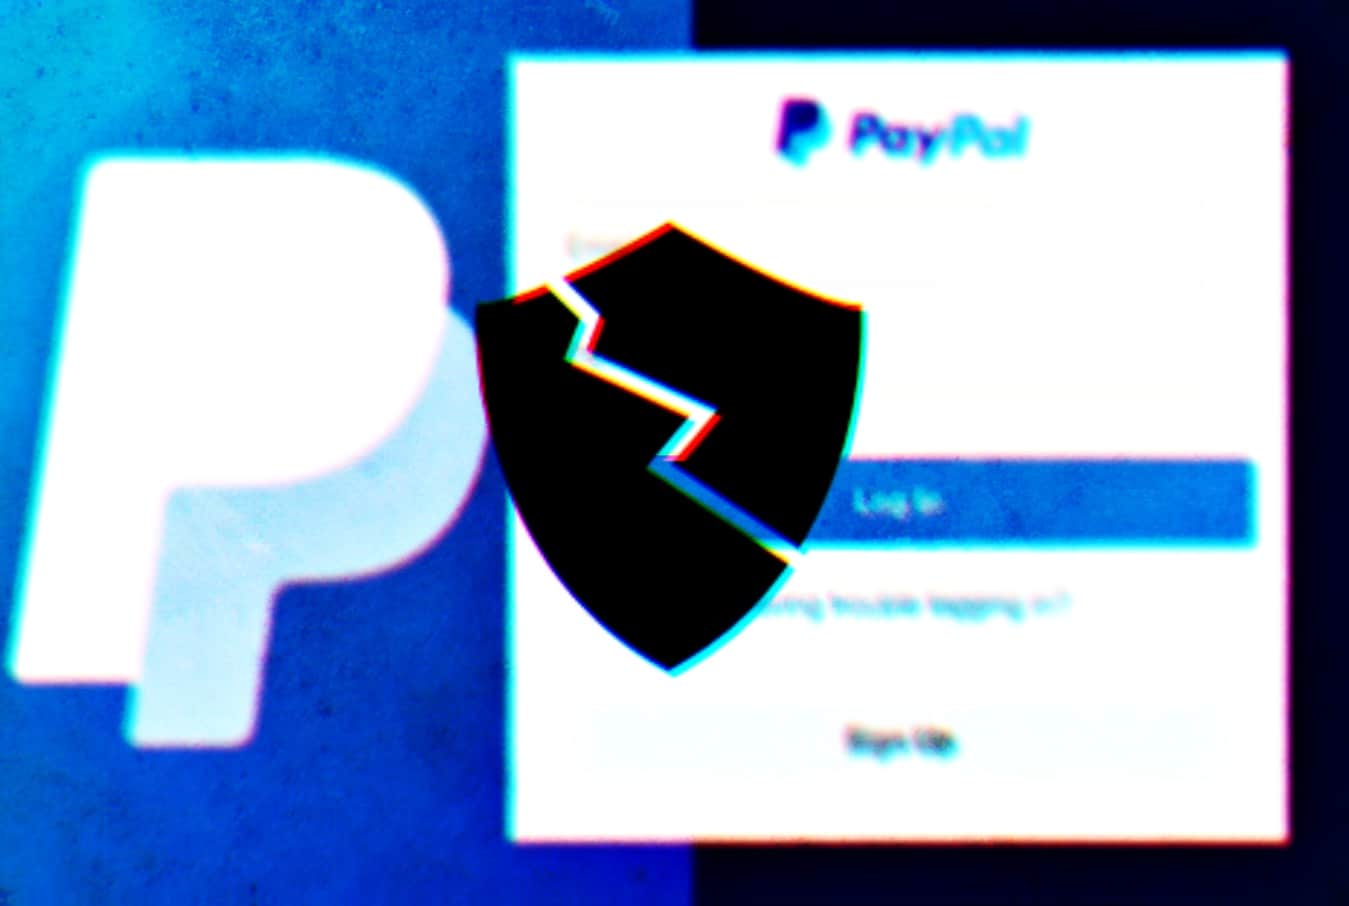 PayPal's bug bounty handling of vulnerability reports